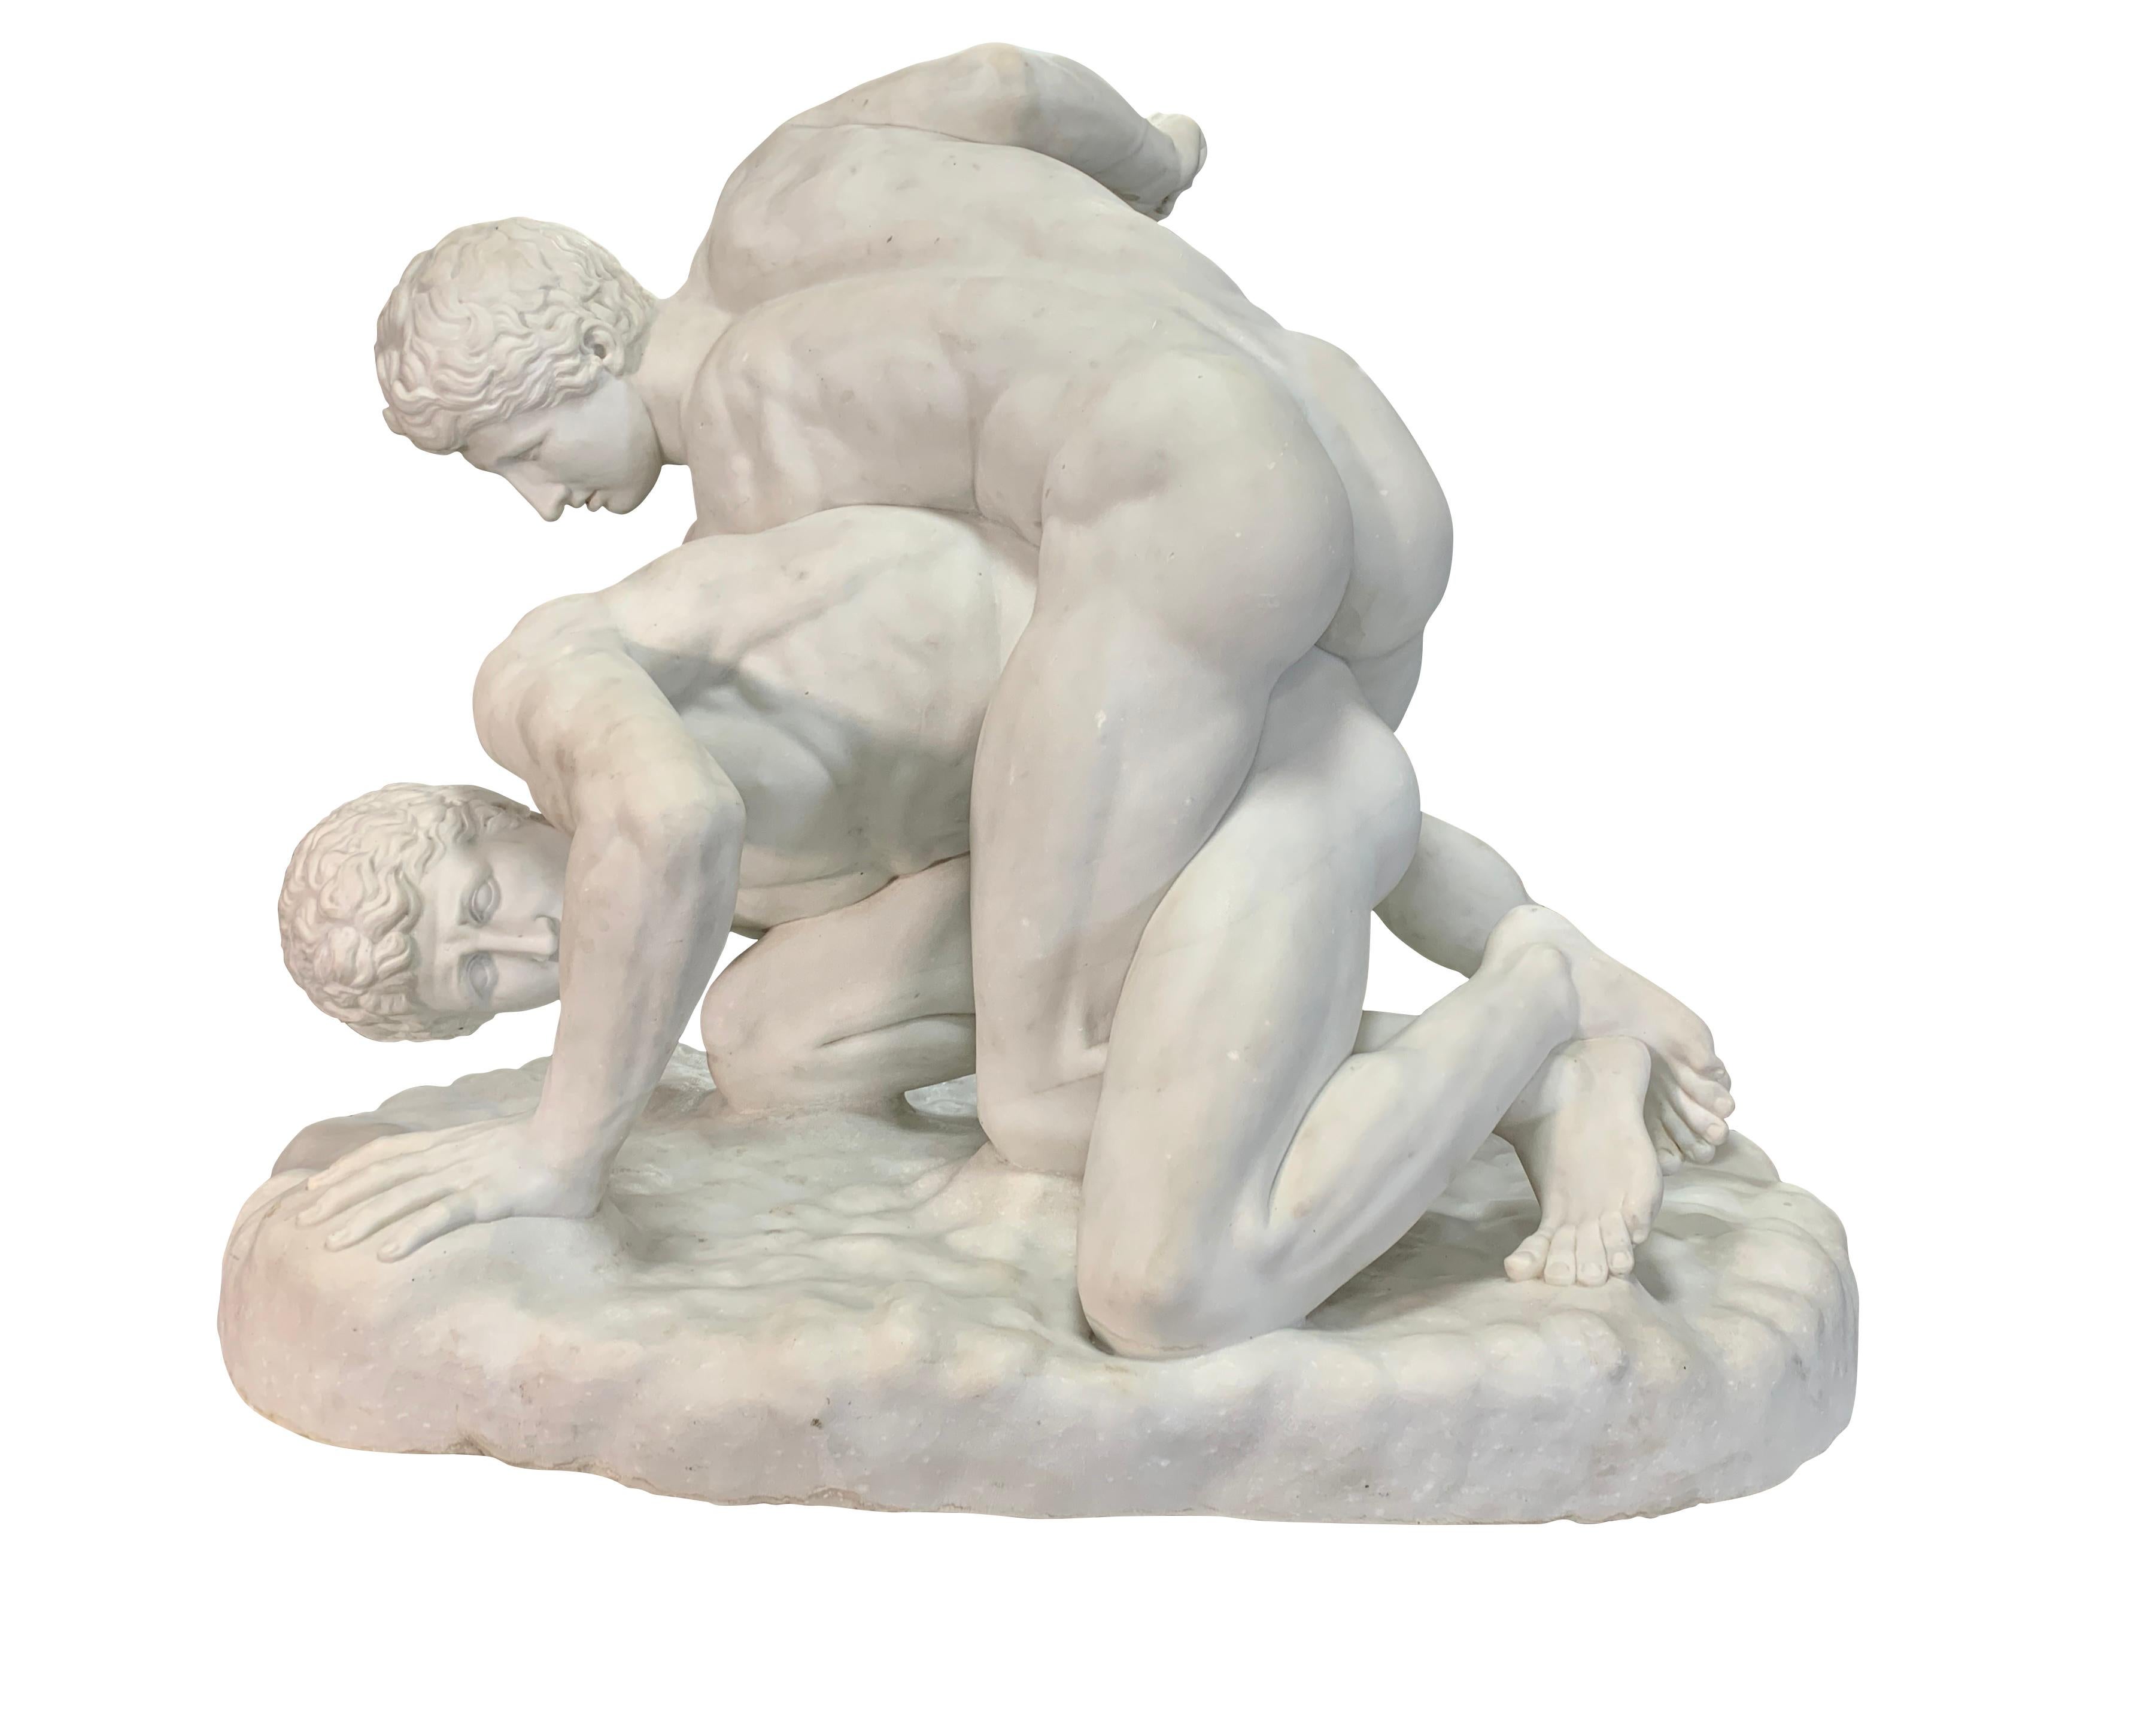 Life Size 19th Century Italian White Marble Sculpture Titled 